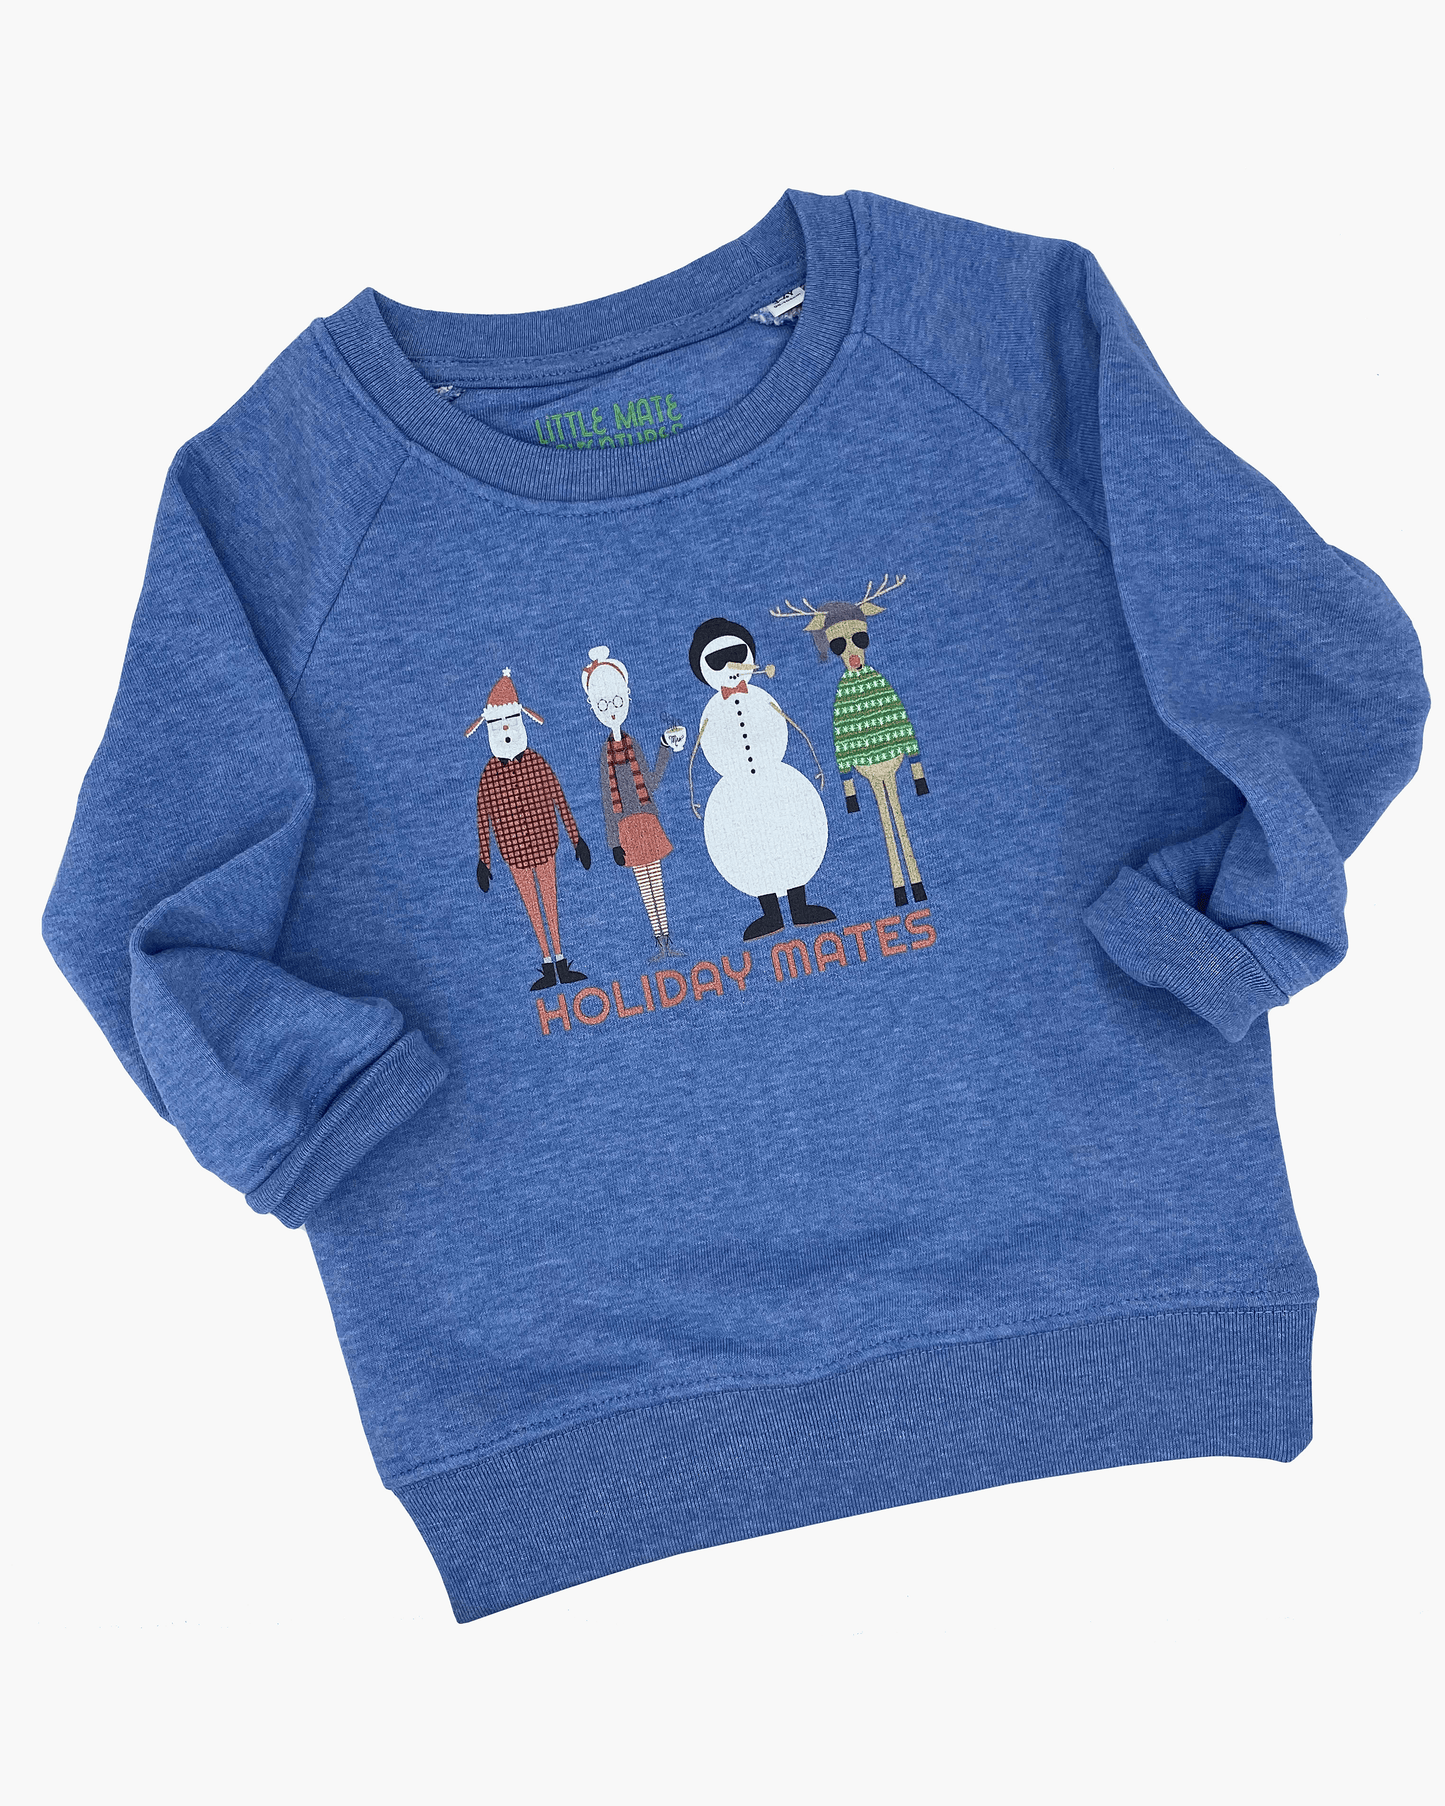 HOLIDAY MATES - Kids + Adult Sweatshirt Matching - two colours and styles - Little Mate Adventures